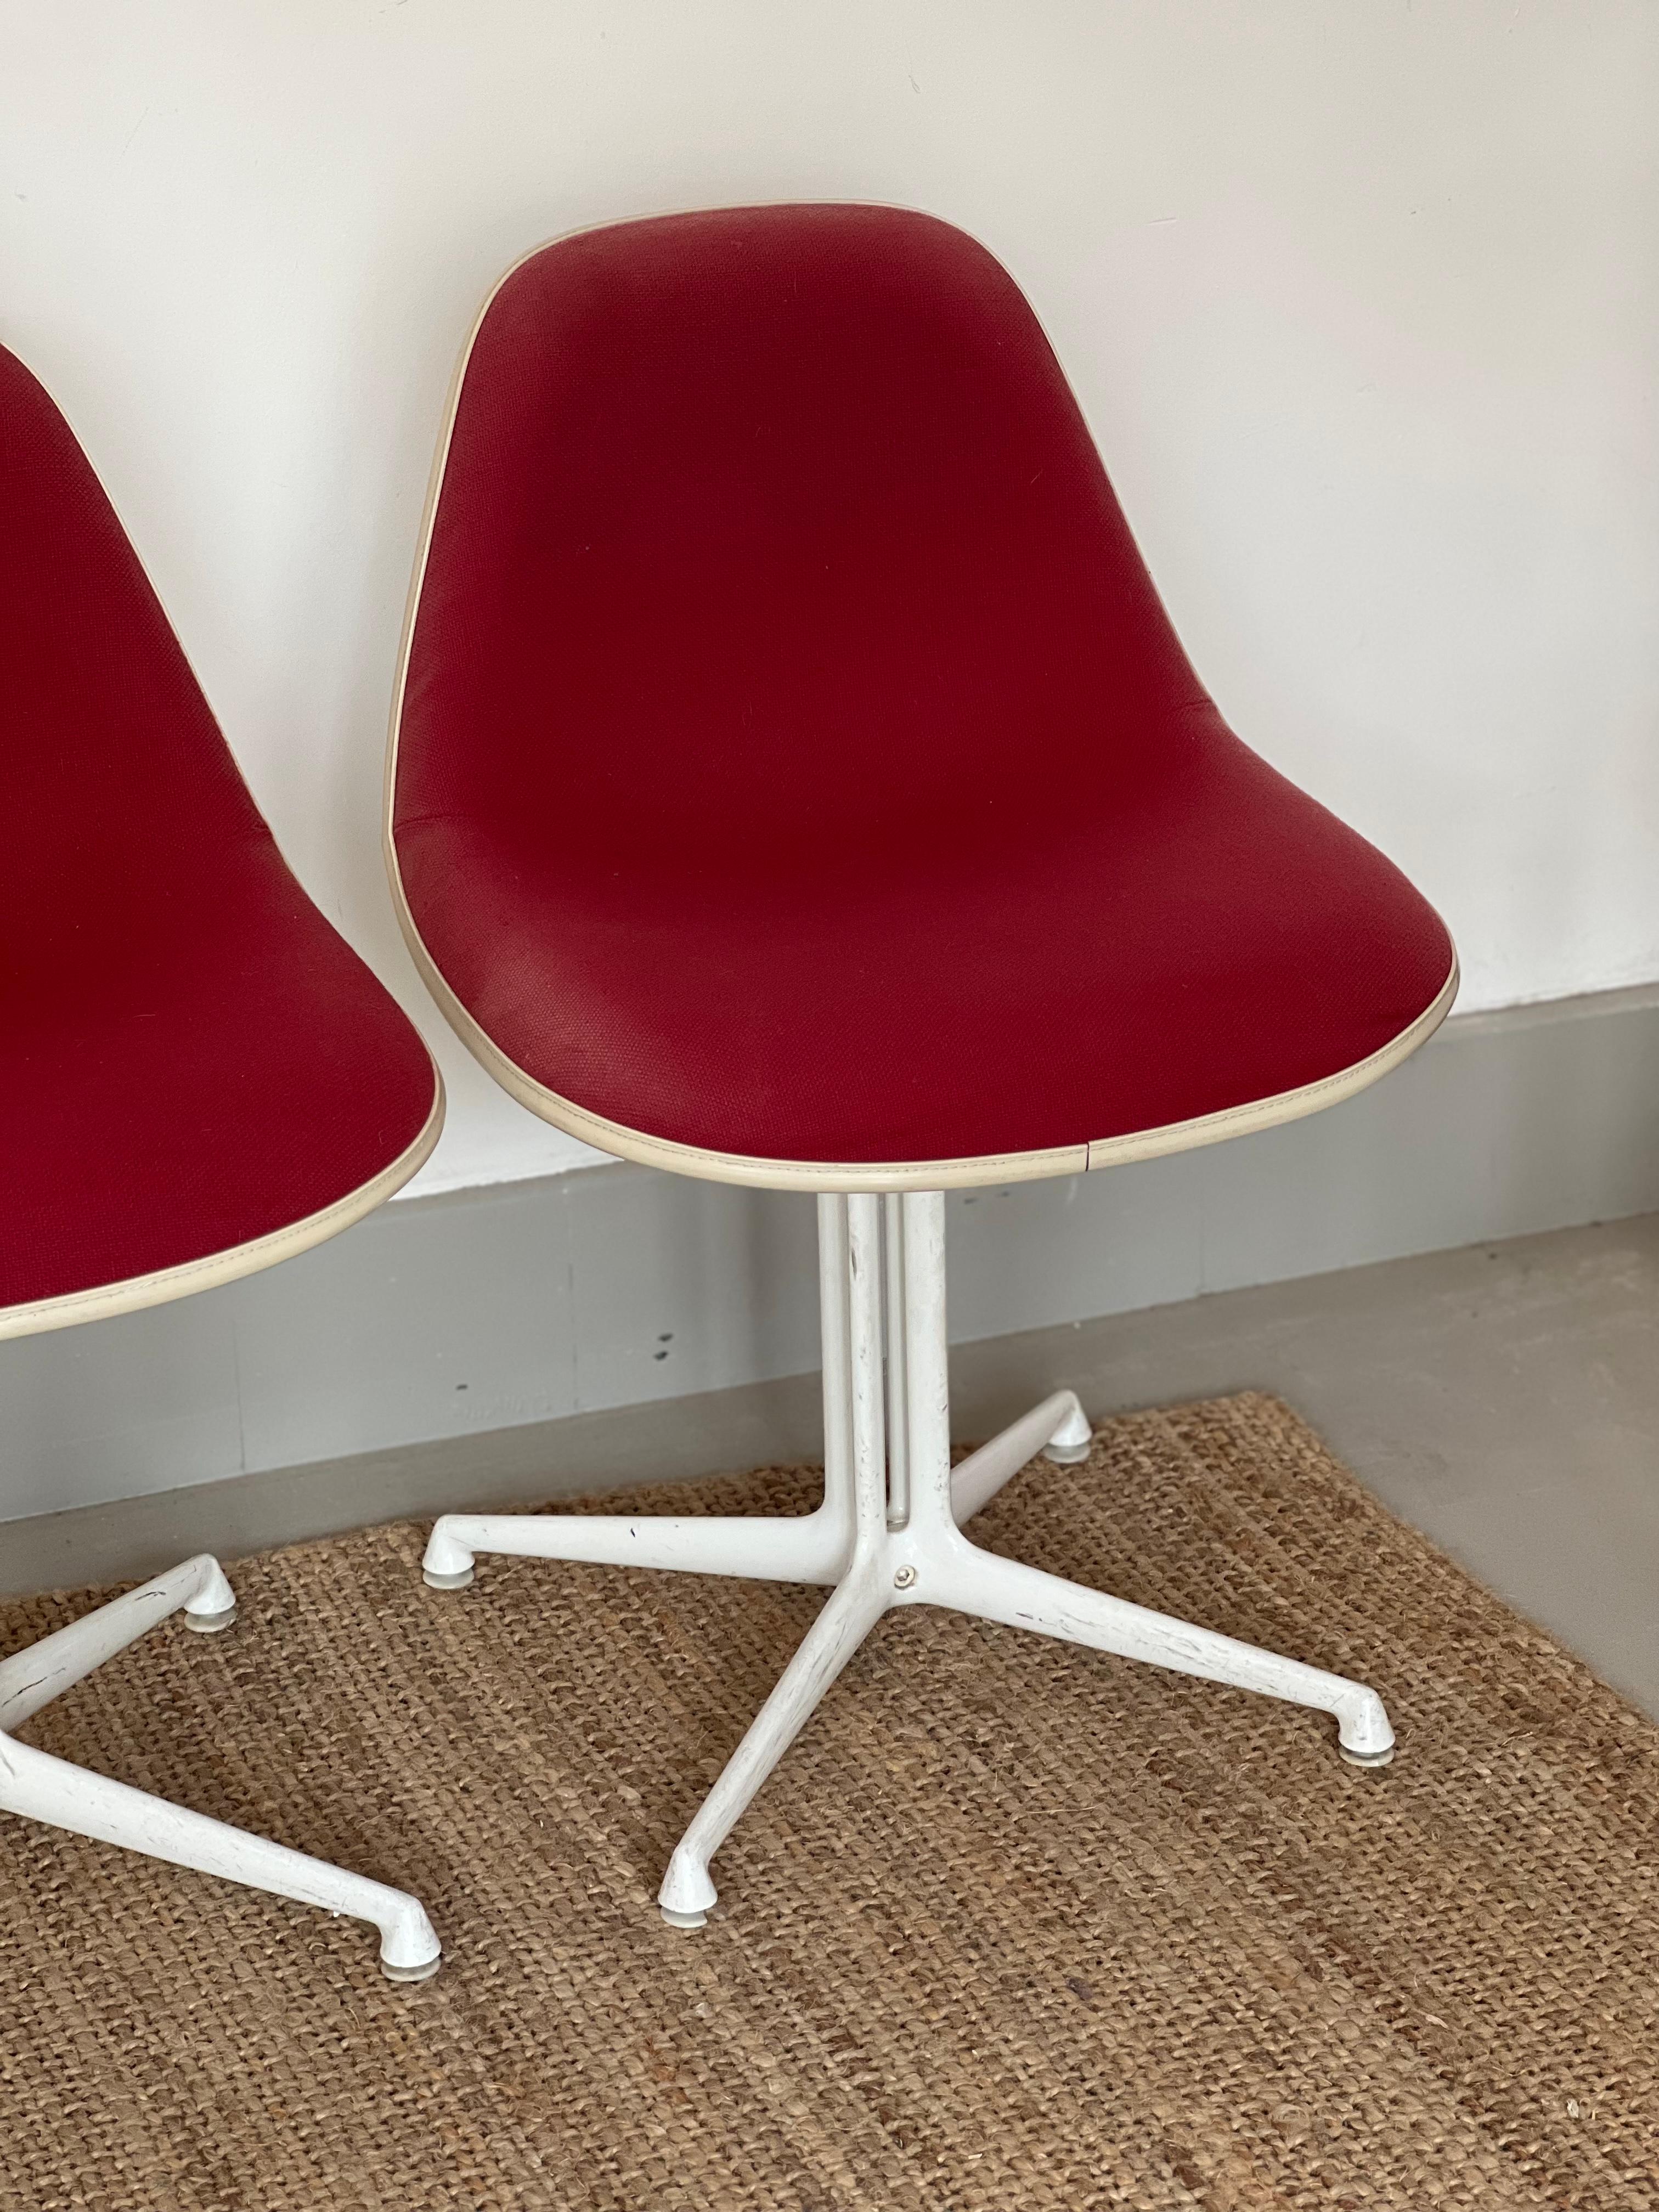 Fibreglass La Fonda Chair by Charles & Ray Eames for Vitra, 1960s For Sale 4